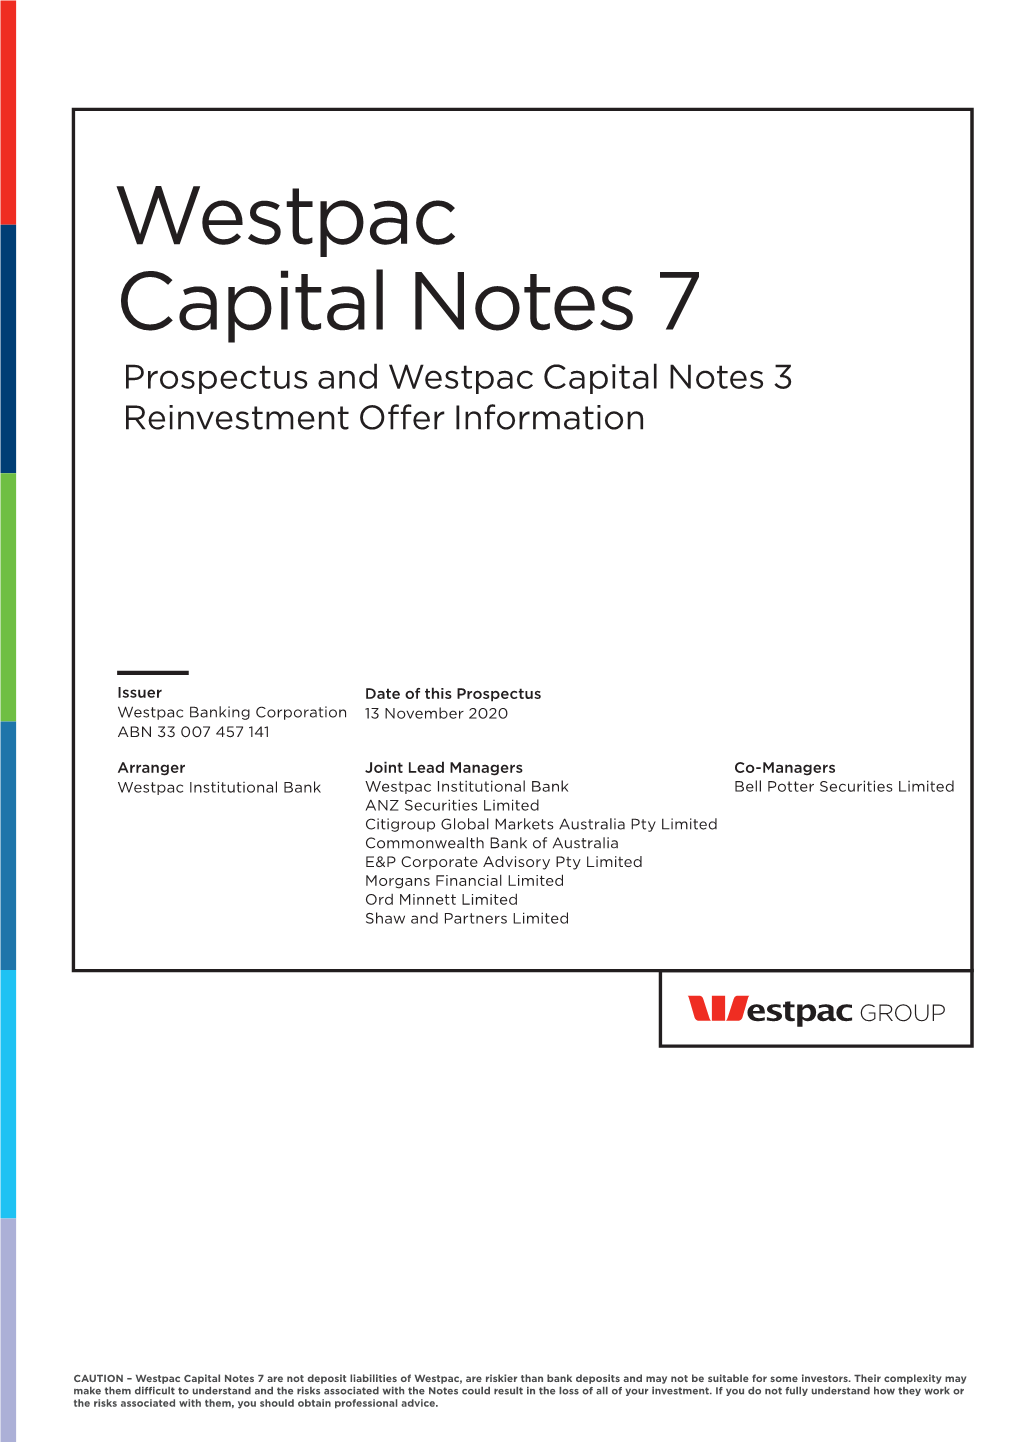 Westpac Capital Notes 7 Prospectus and Westpac Capital Notes 3 Reinvestment Offer Information